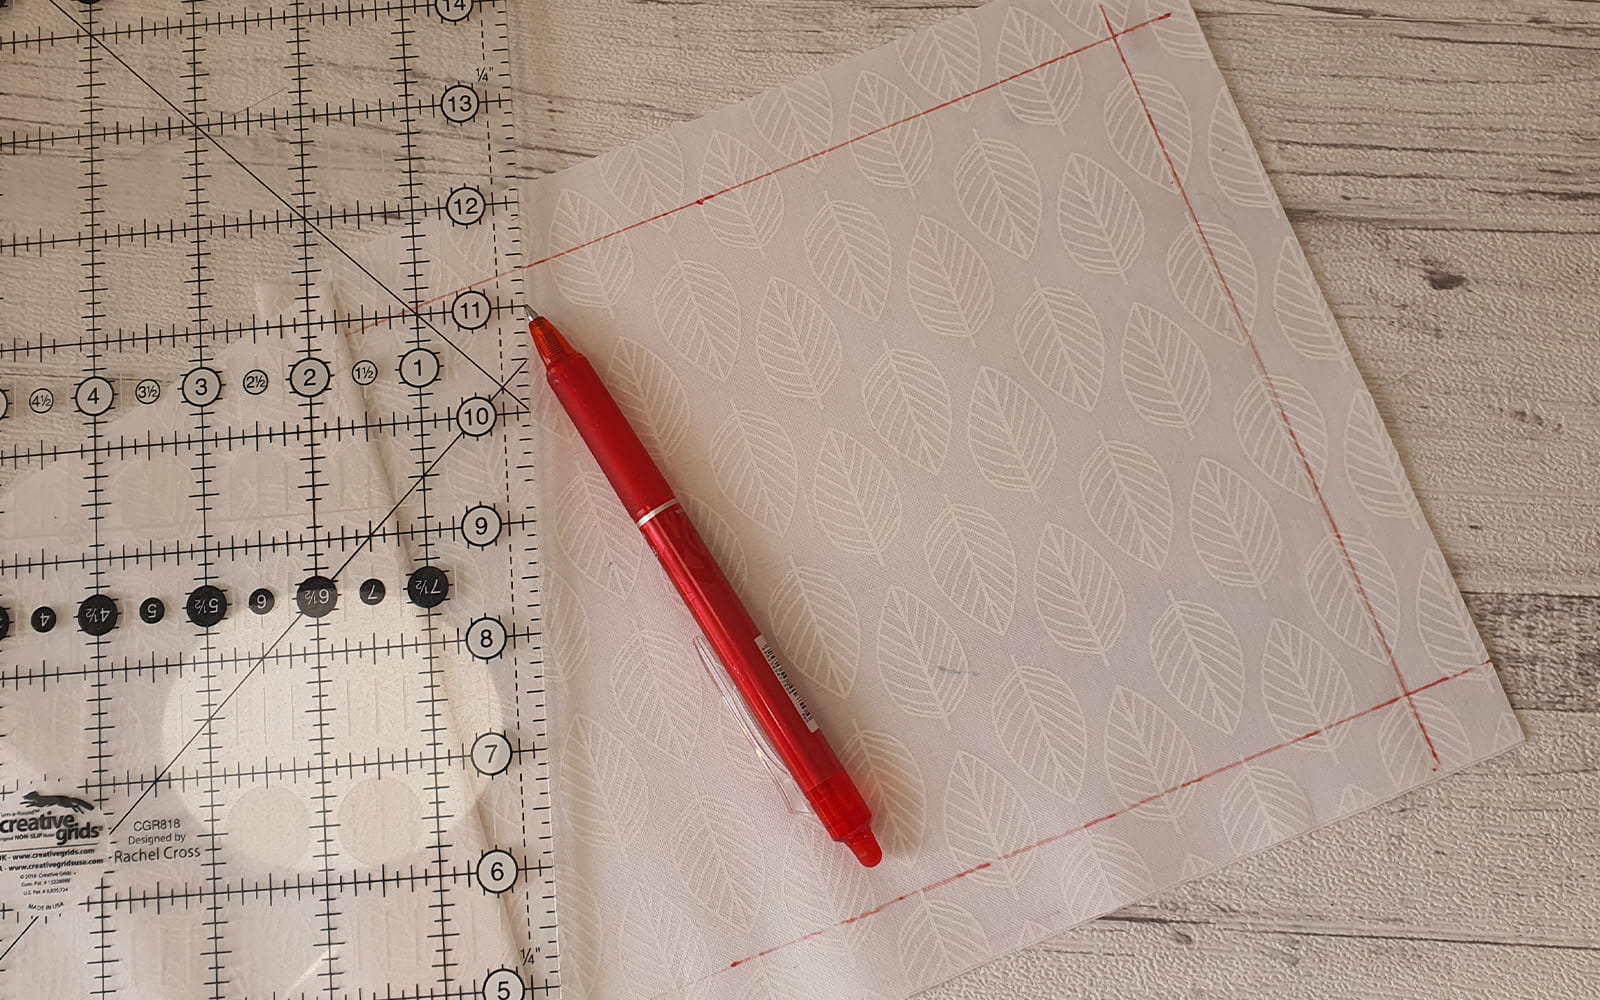 Marking the fabric squares